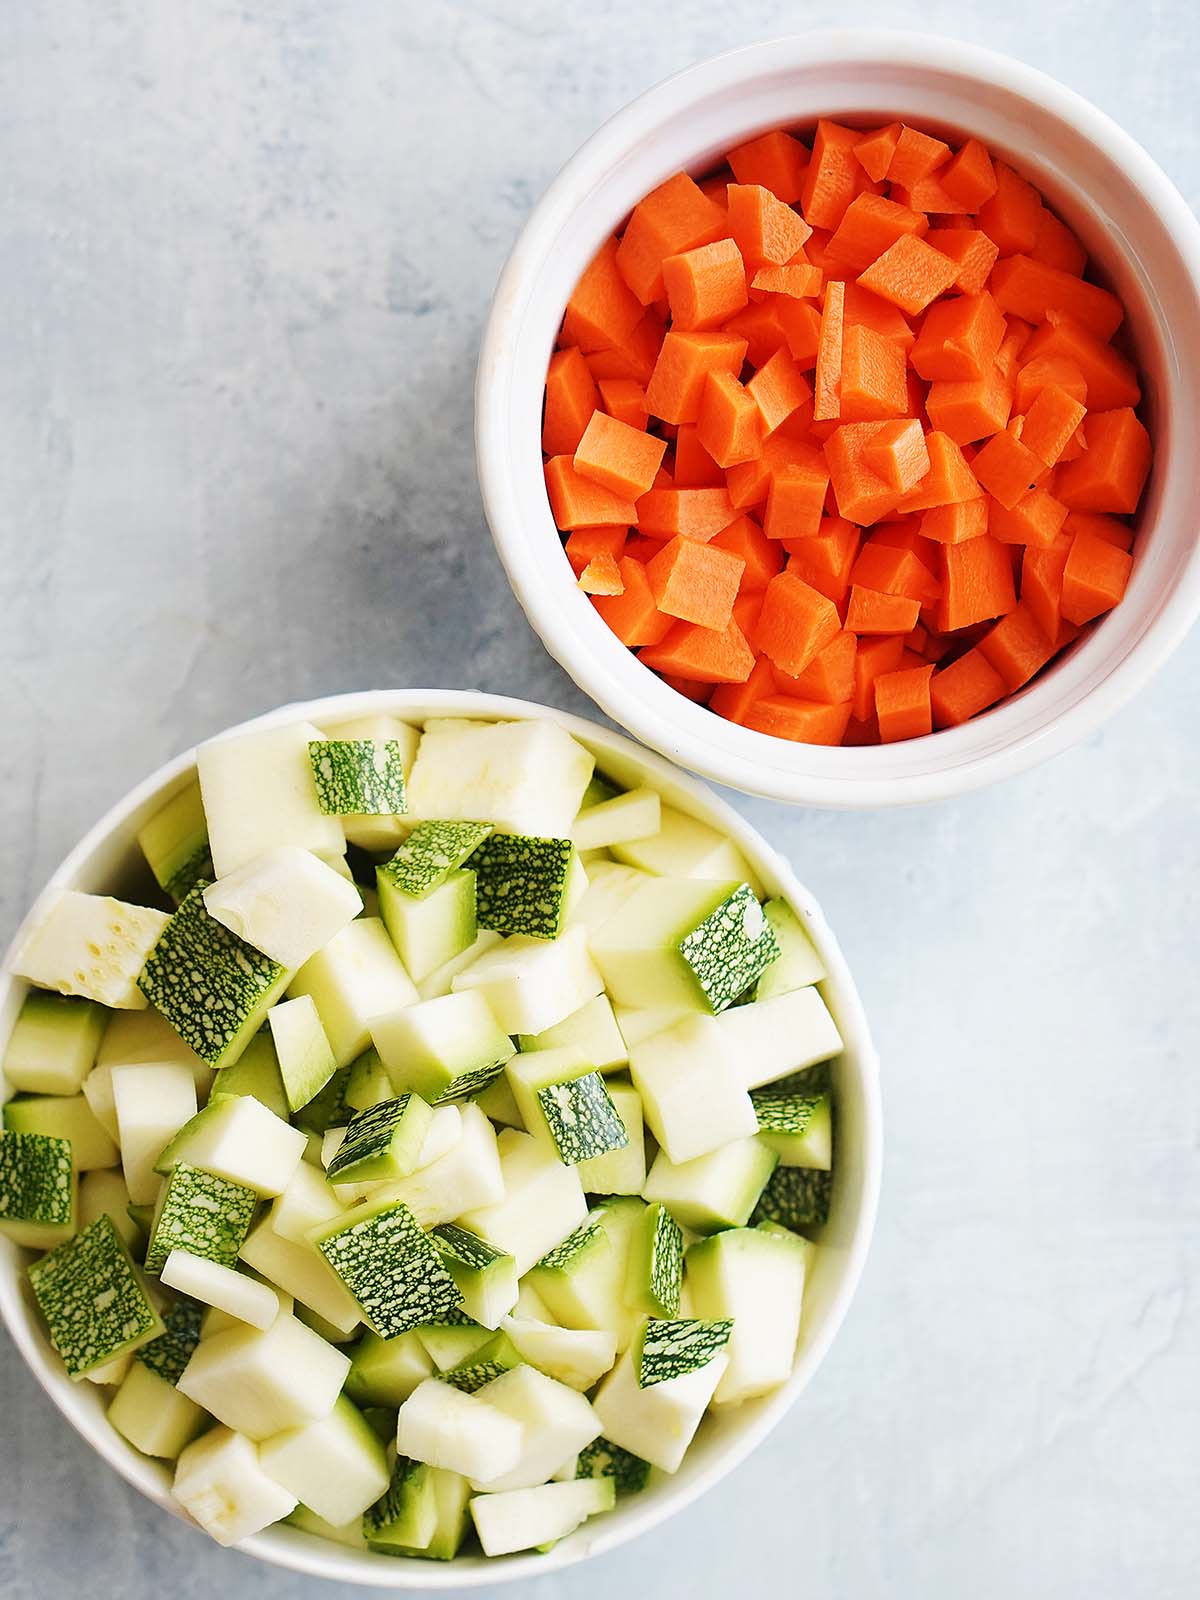 chopped zucchini and chopped carrots in a small bowl.